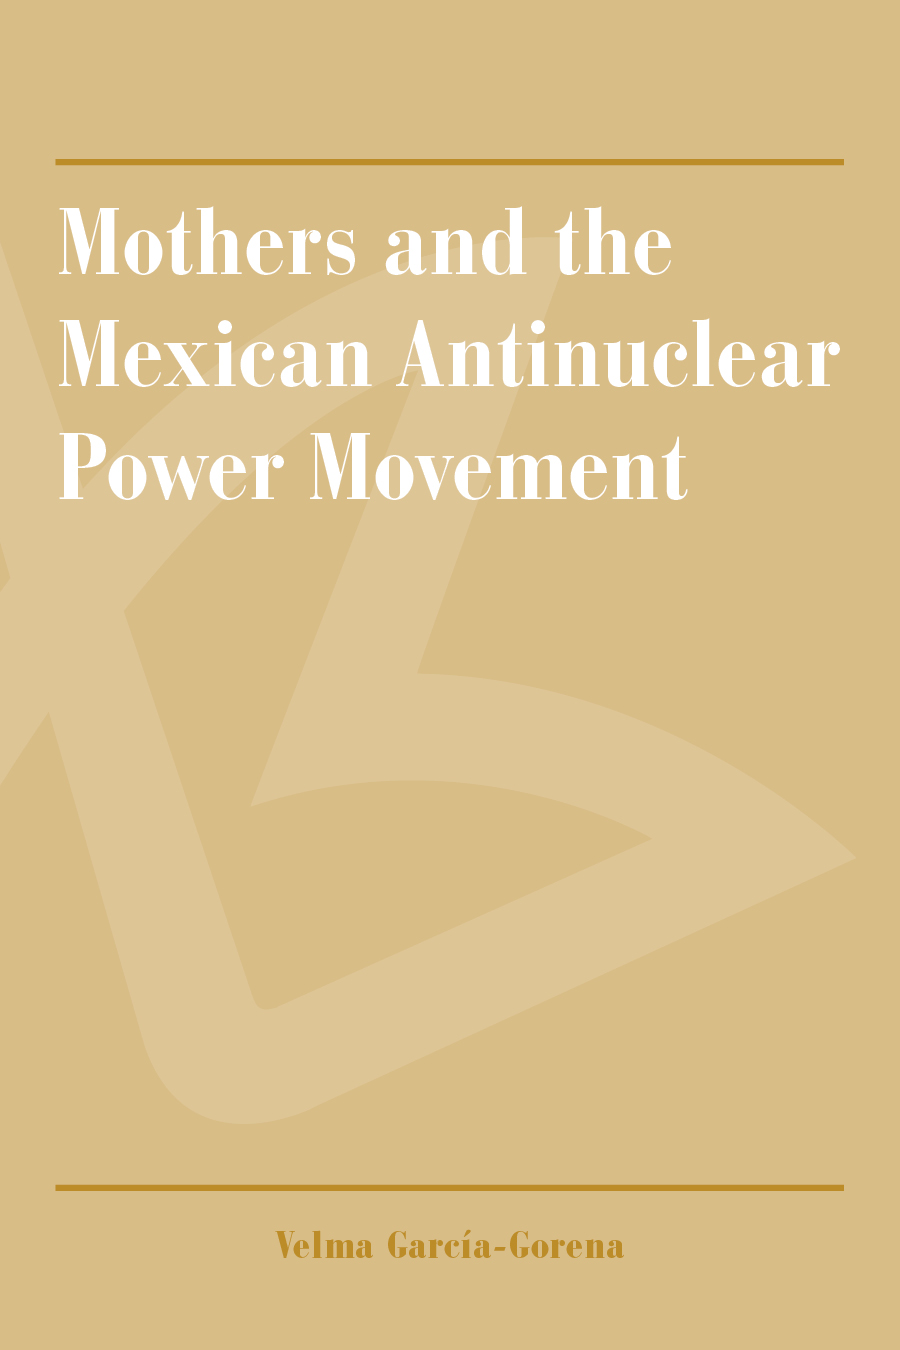 Mothers and the Mexican Antinuclear Power Movement